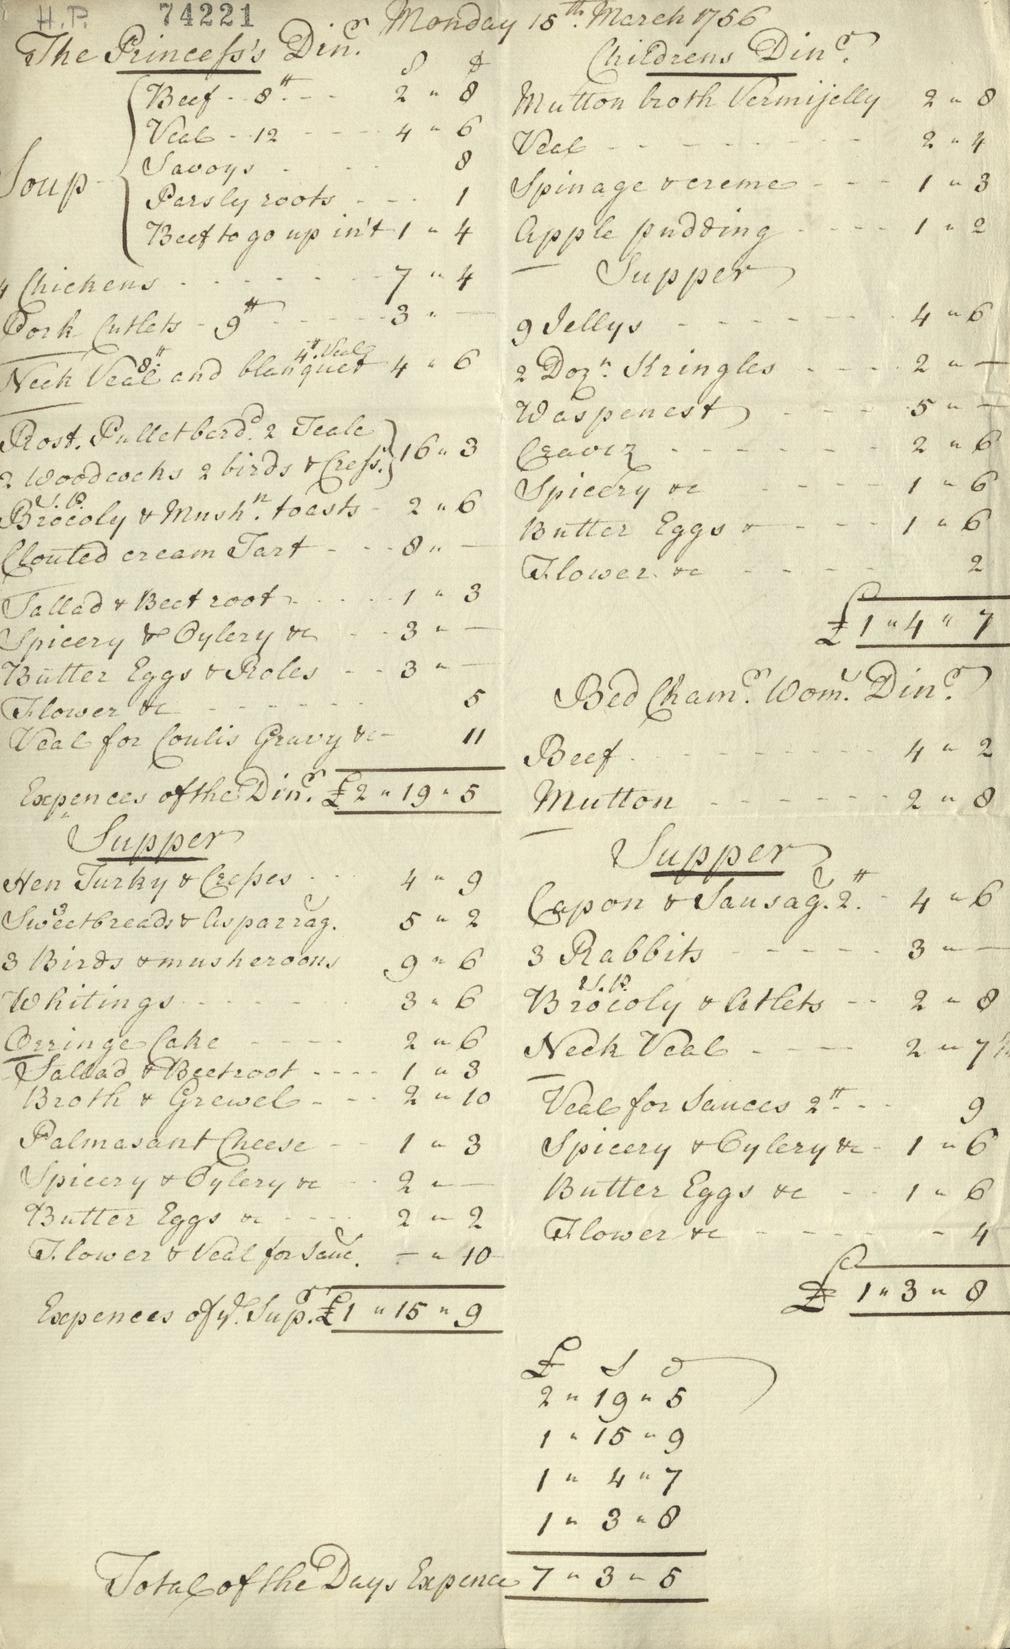 Bill showing cost of one day's food for Princess Augusta